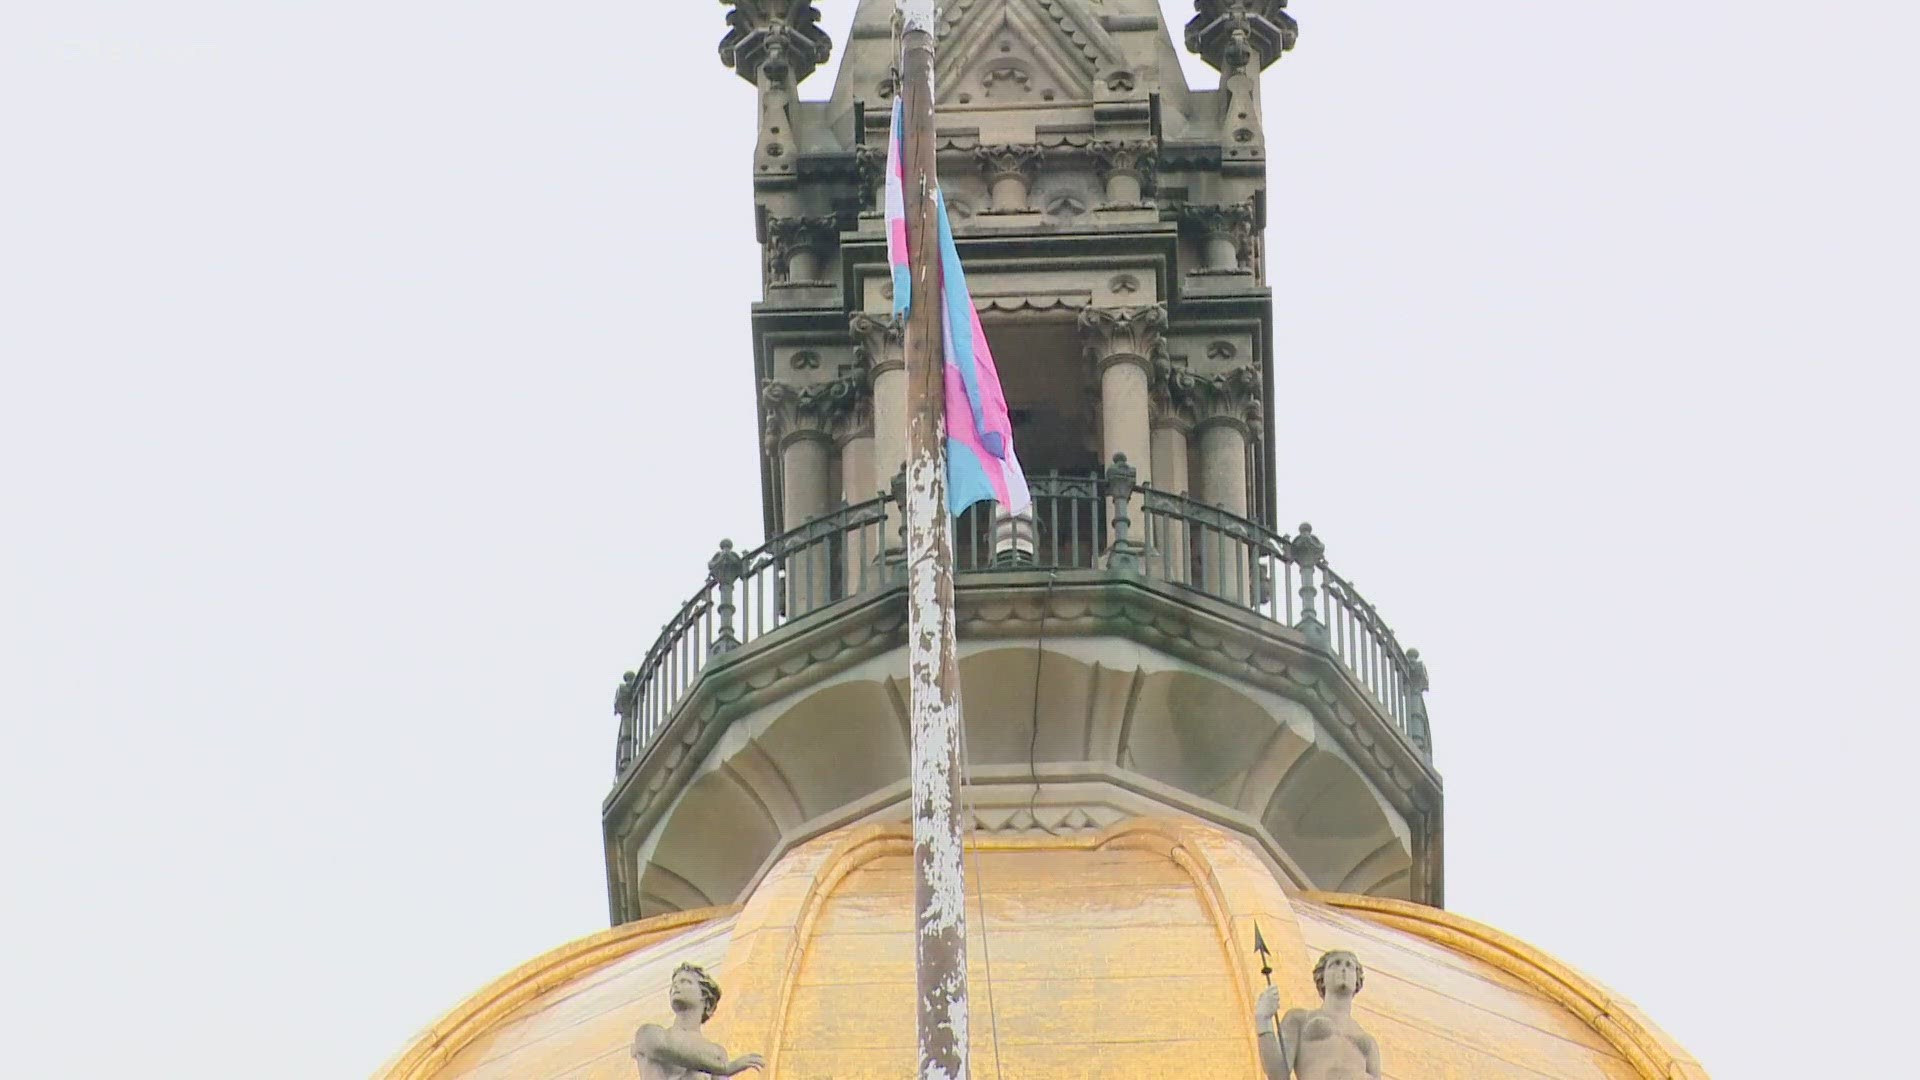 It's only the second time in state history that the Trans Pride flag is flying over the State Capitol. International Transgender Day of Visibility is this Sunday.